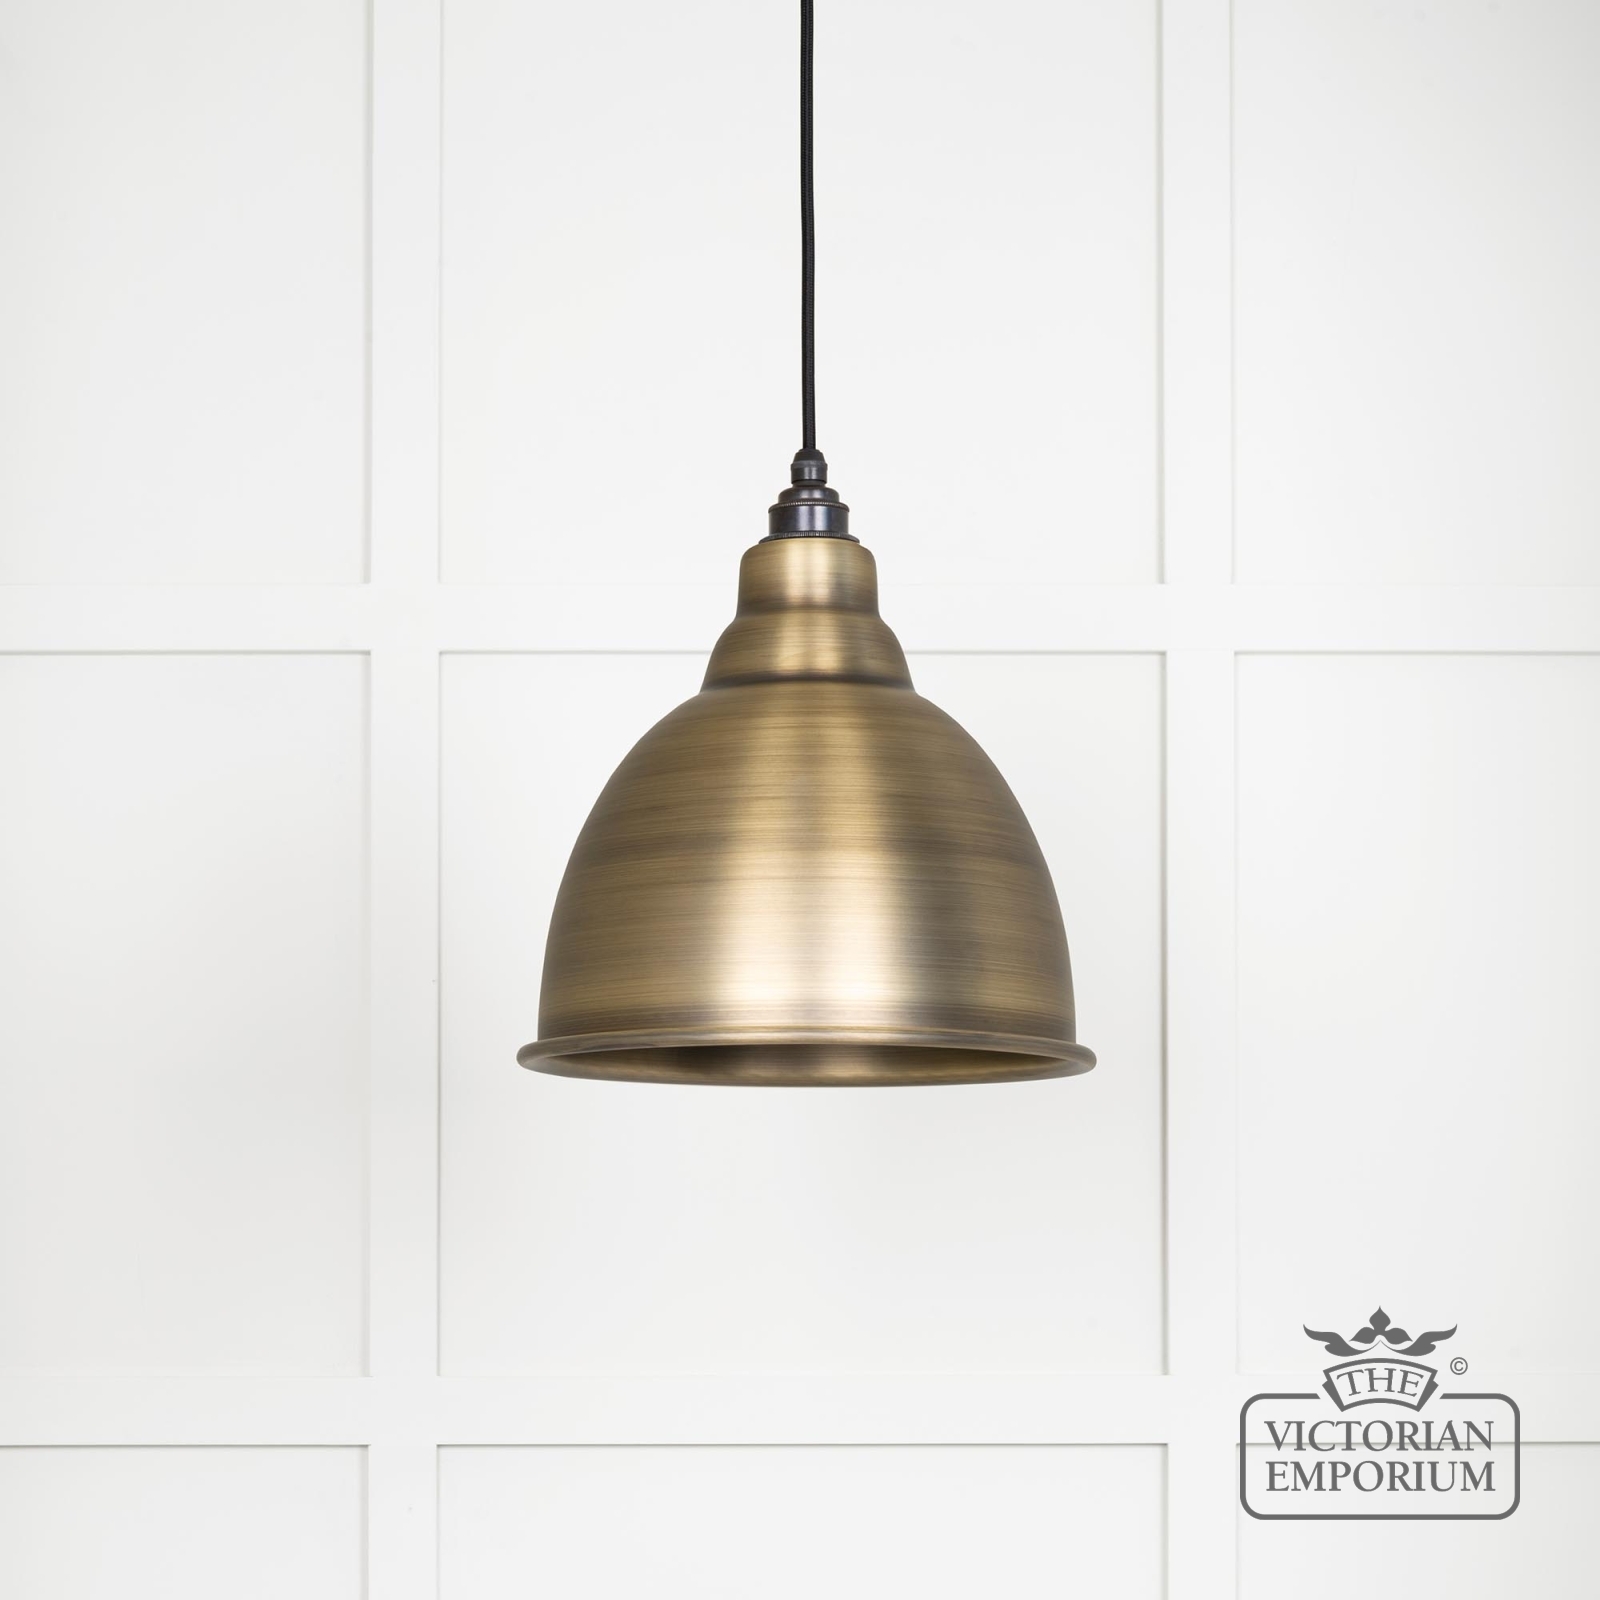 Brindle pendant light in aged brass